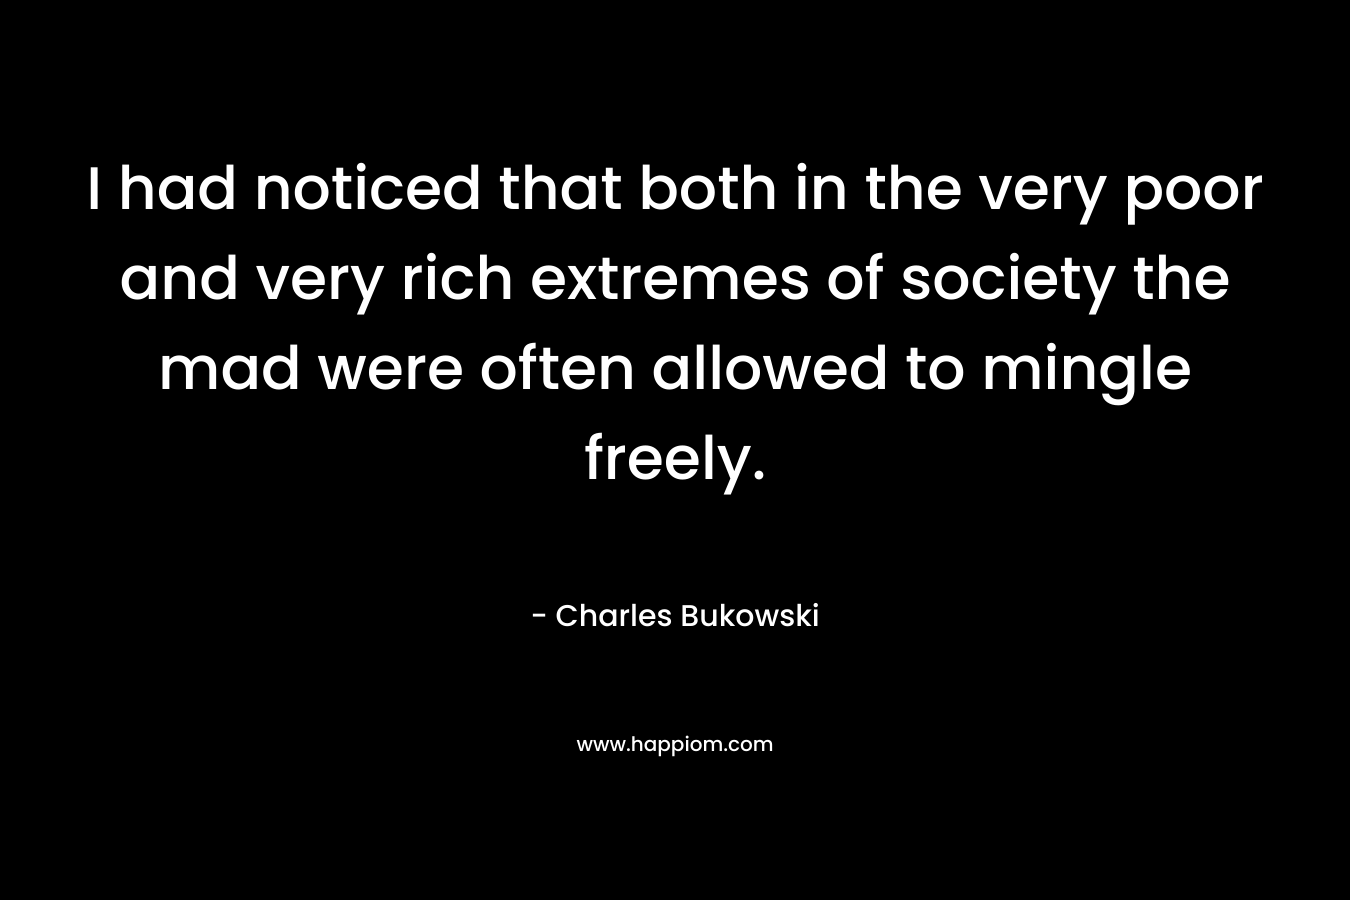 I had noticed that both in the very poor and very rich extremes of society the mad were often allowed to mingle freely. – Charles Bukowski